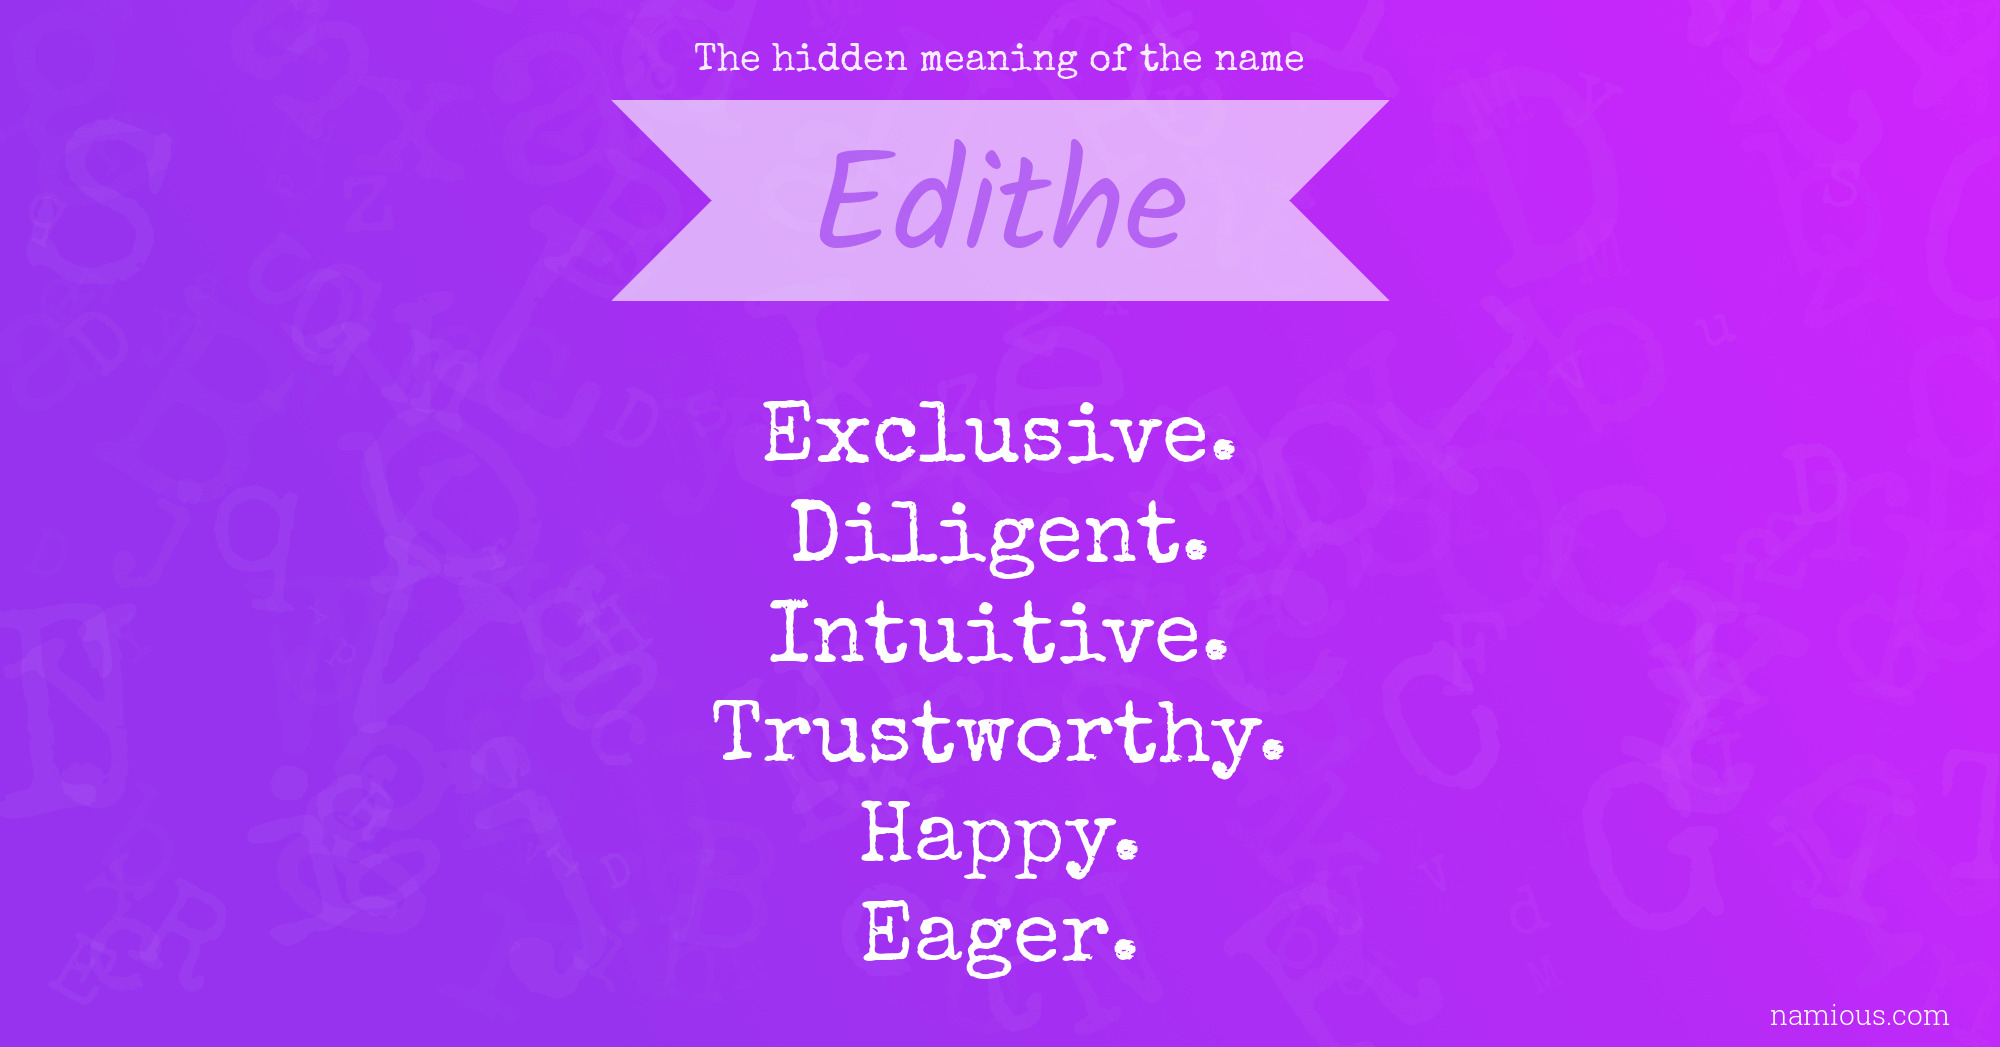 The hidden meaning of the name Edithe